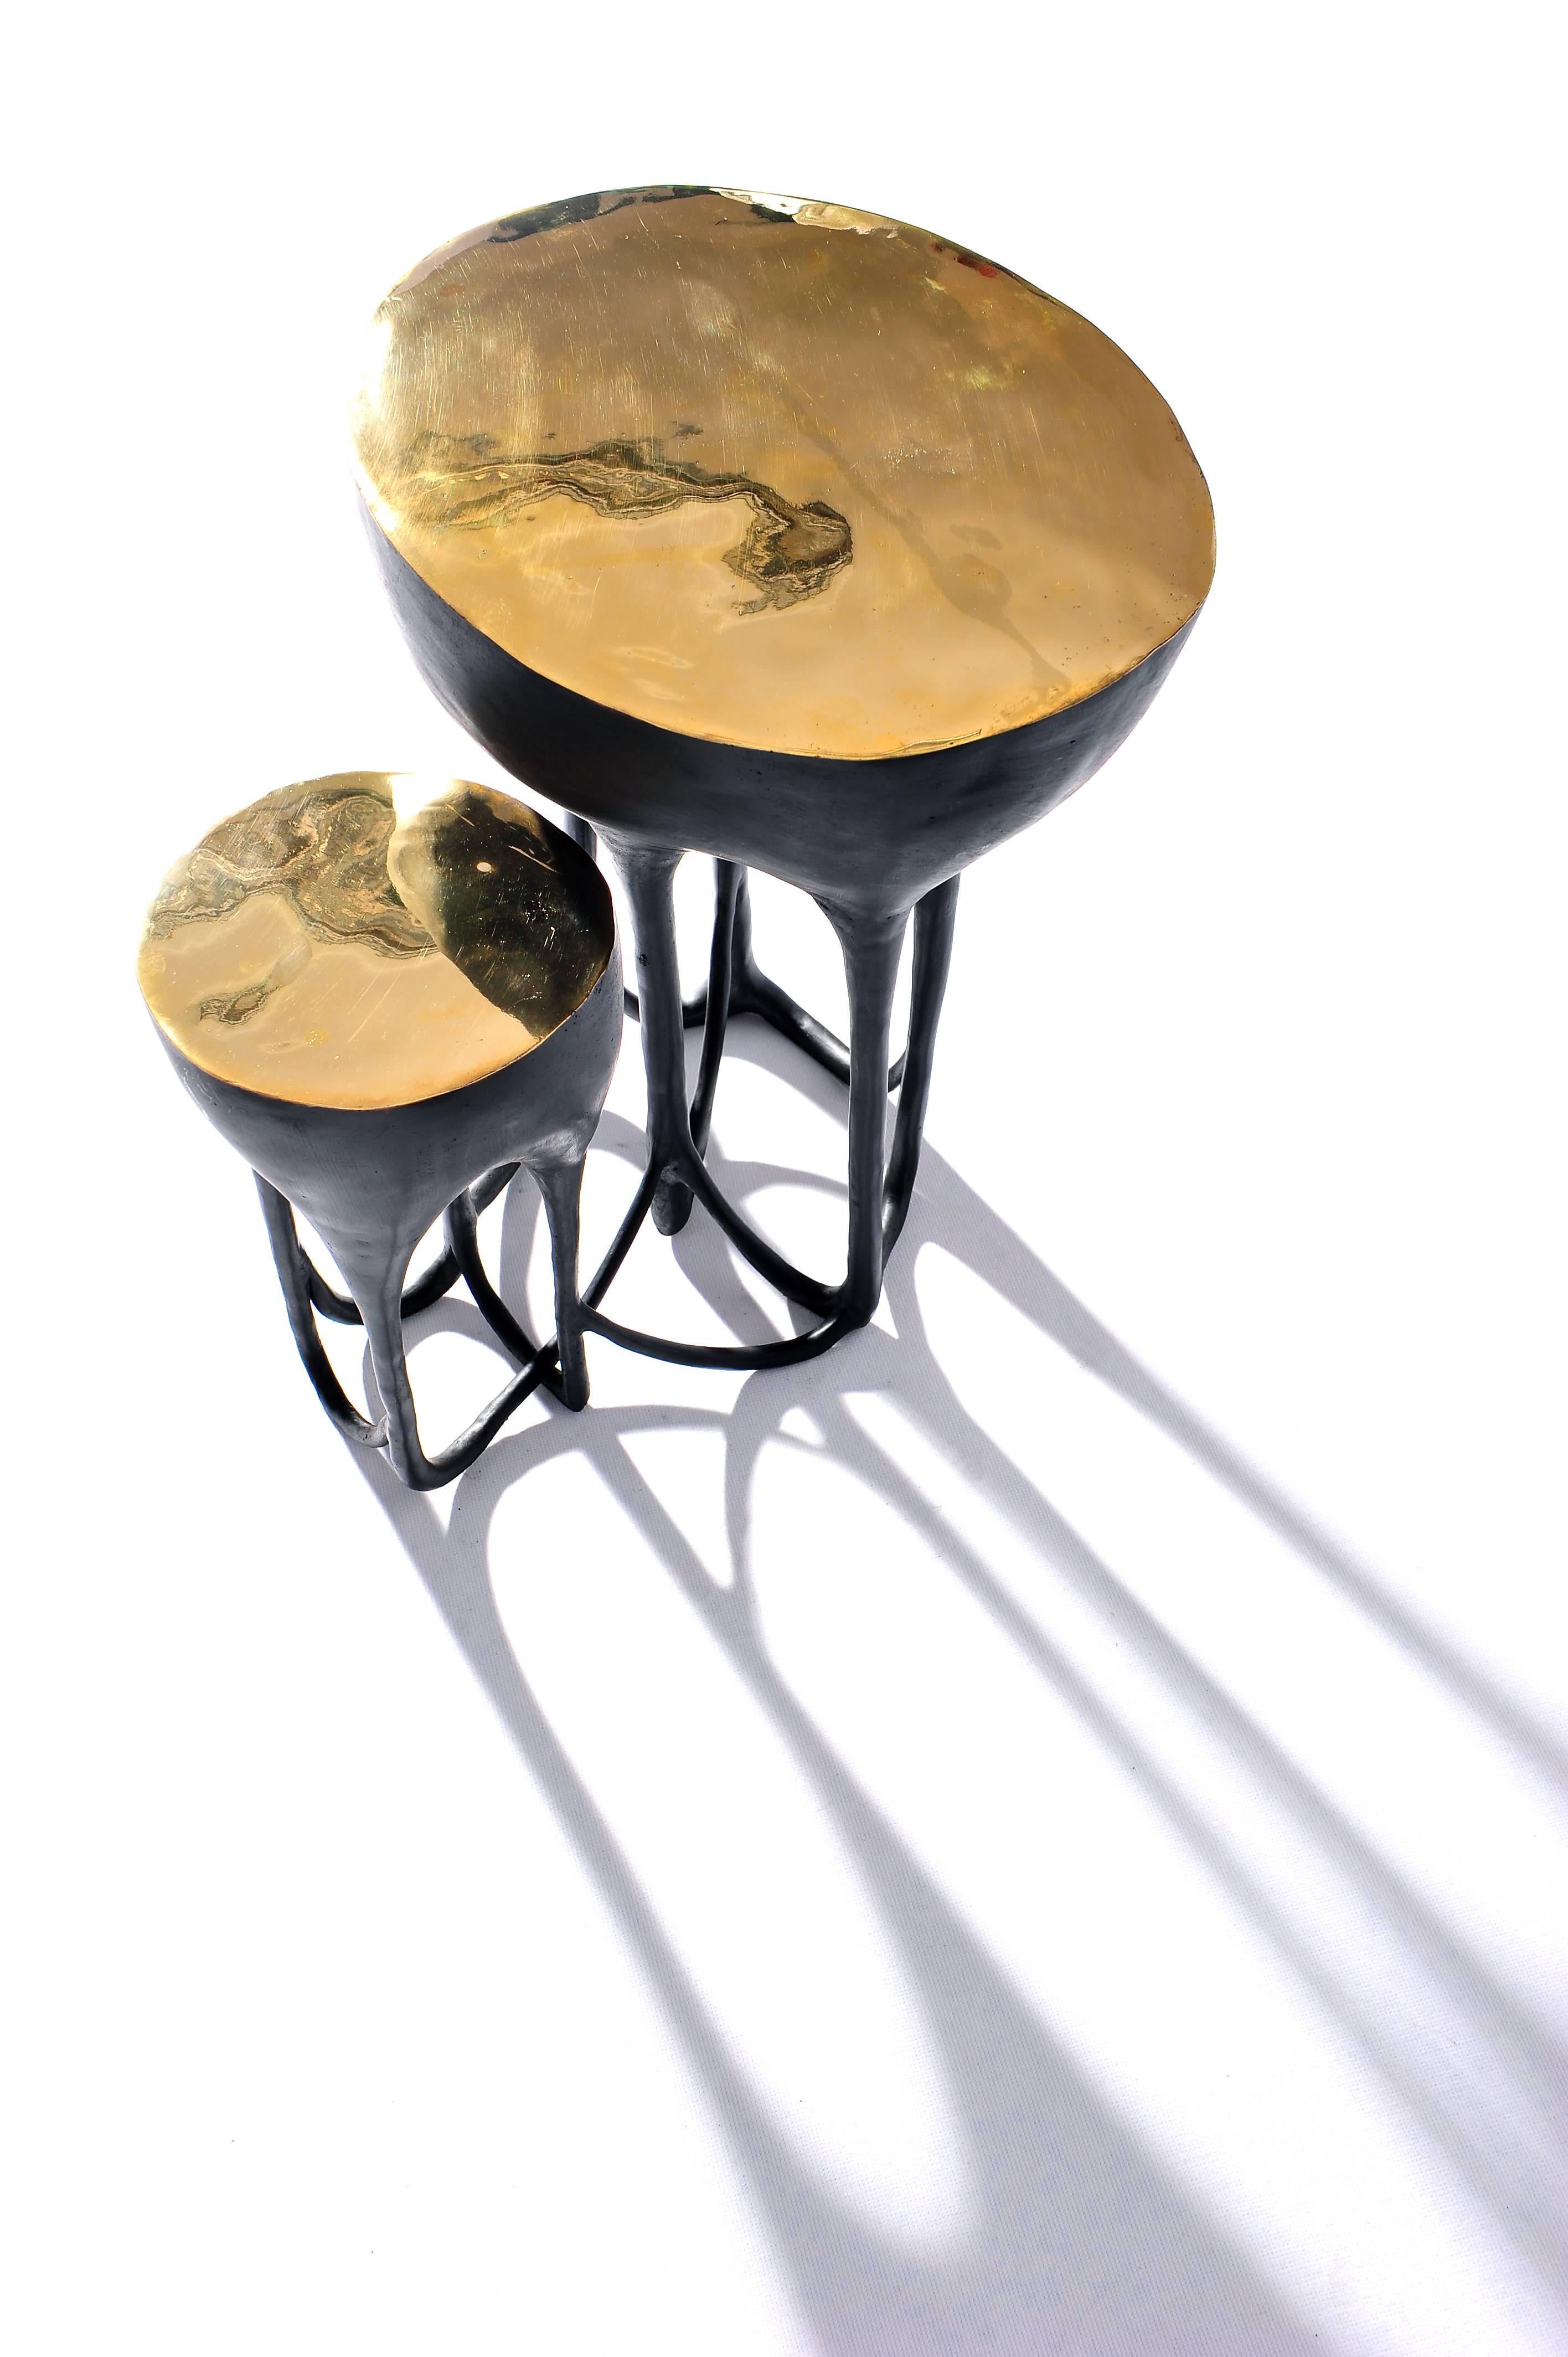 Brass hand-sculpted side table by Masaya.
Brass hand-sculpted side table.
Dimensions: H 50 x W 43 x L 50 cm.
Masaya is our brand's collection which combines stylishly refined designs with the purity of solid wood and marble tops, and bronze